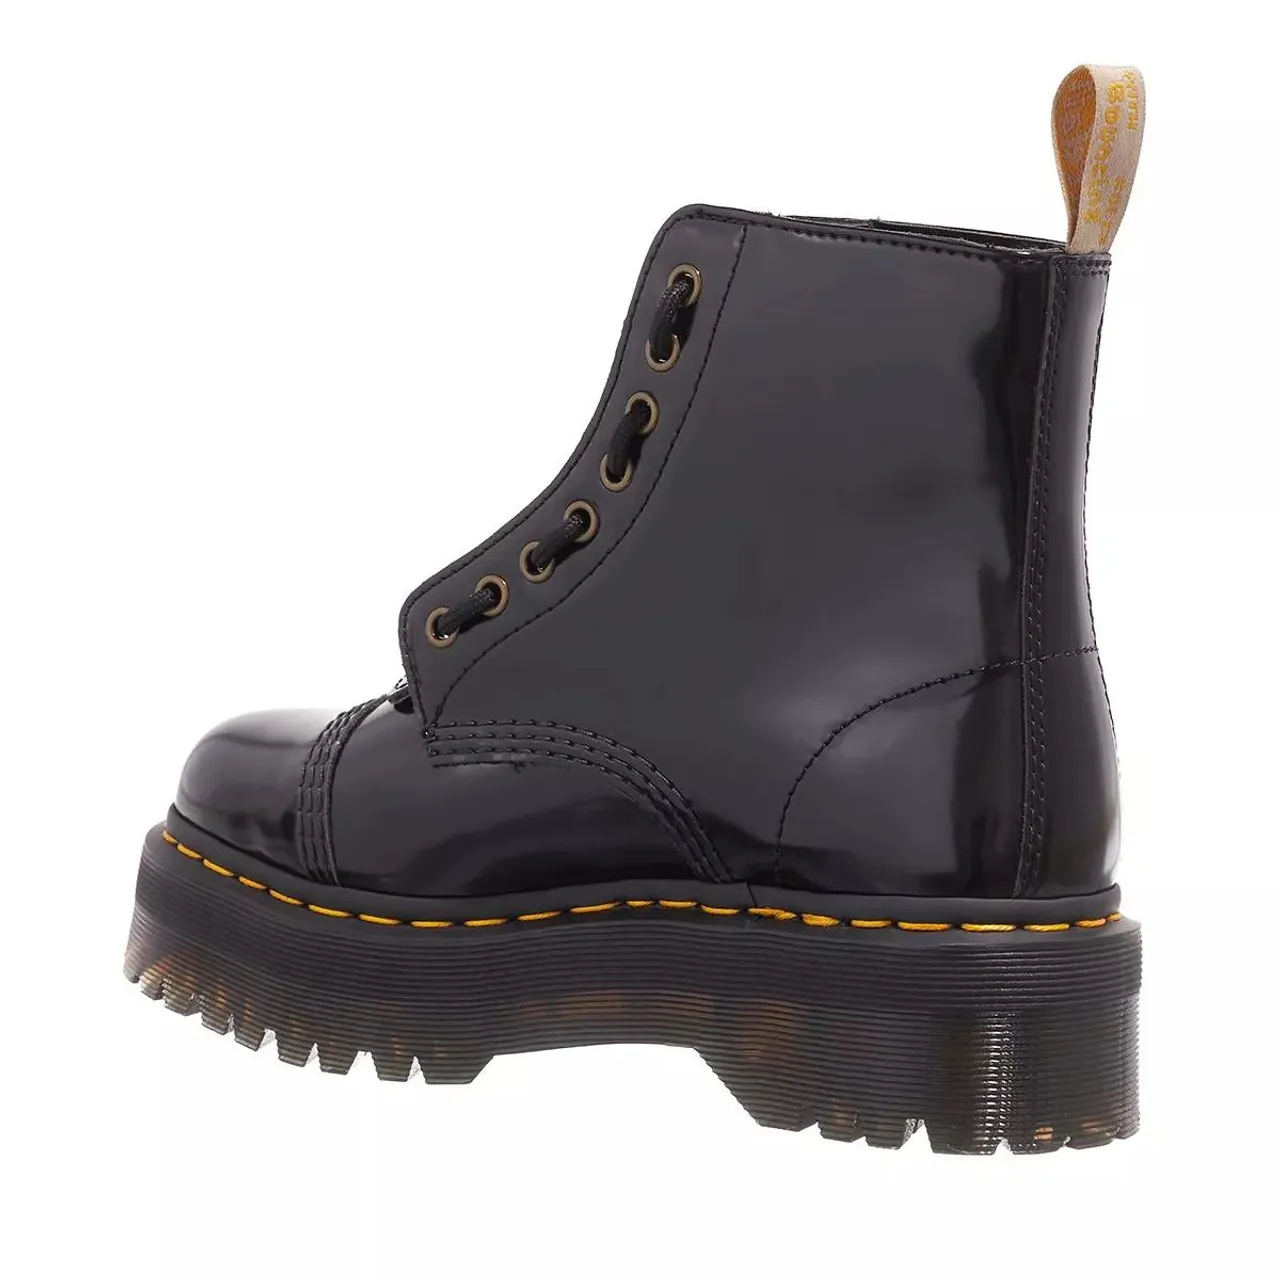 Dr. Martens Boots & Ankle Boots - Vegan Sinclair - black - Boots & Ankle Boots for ladies